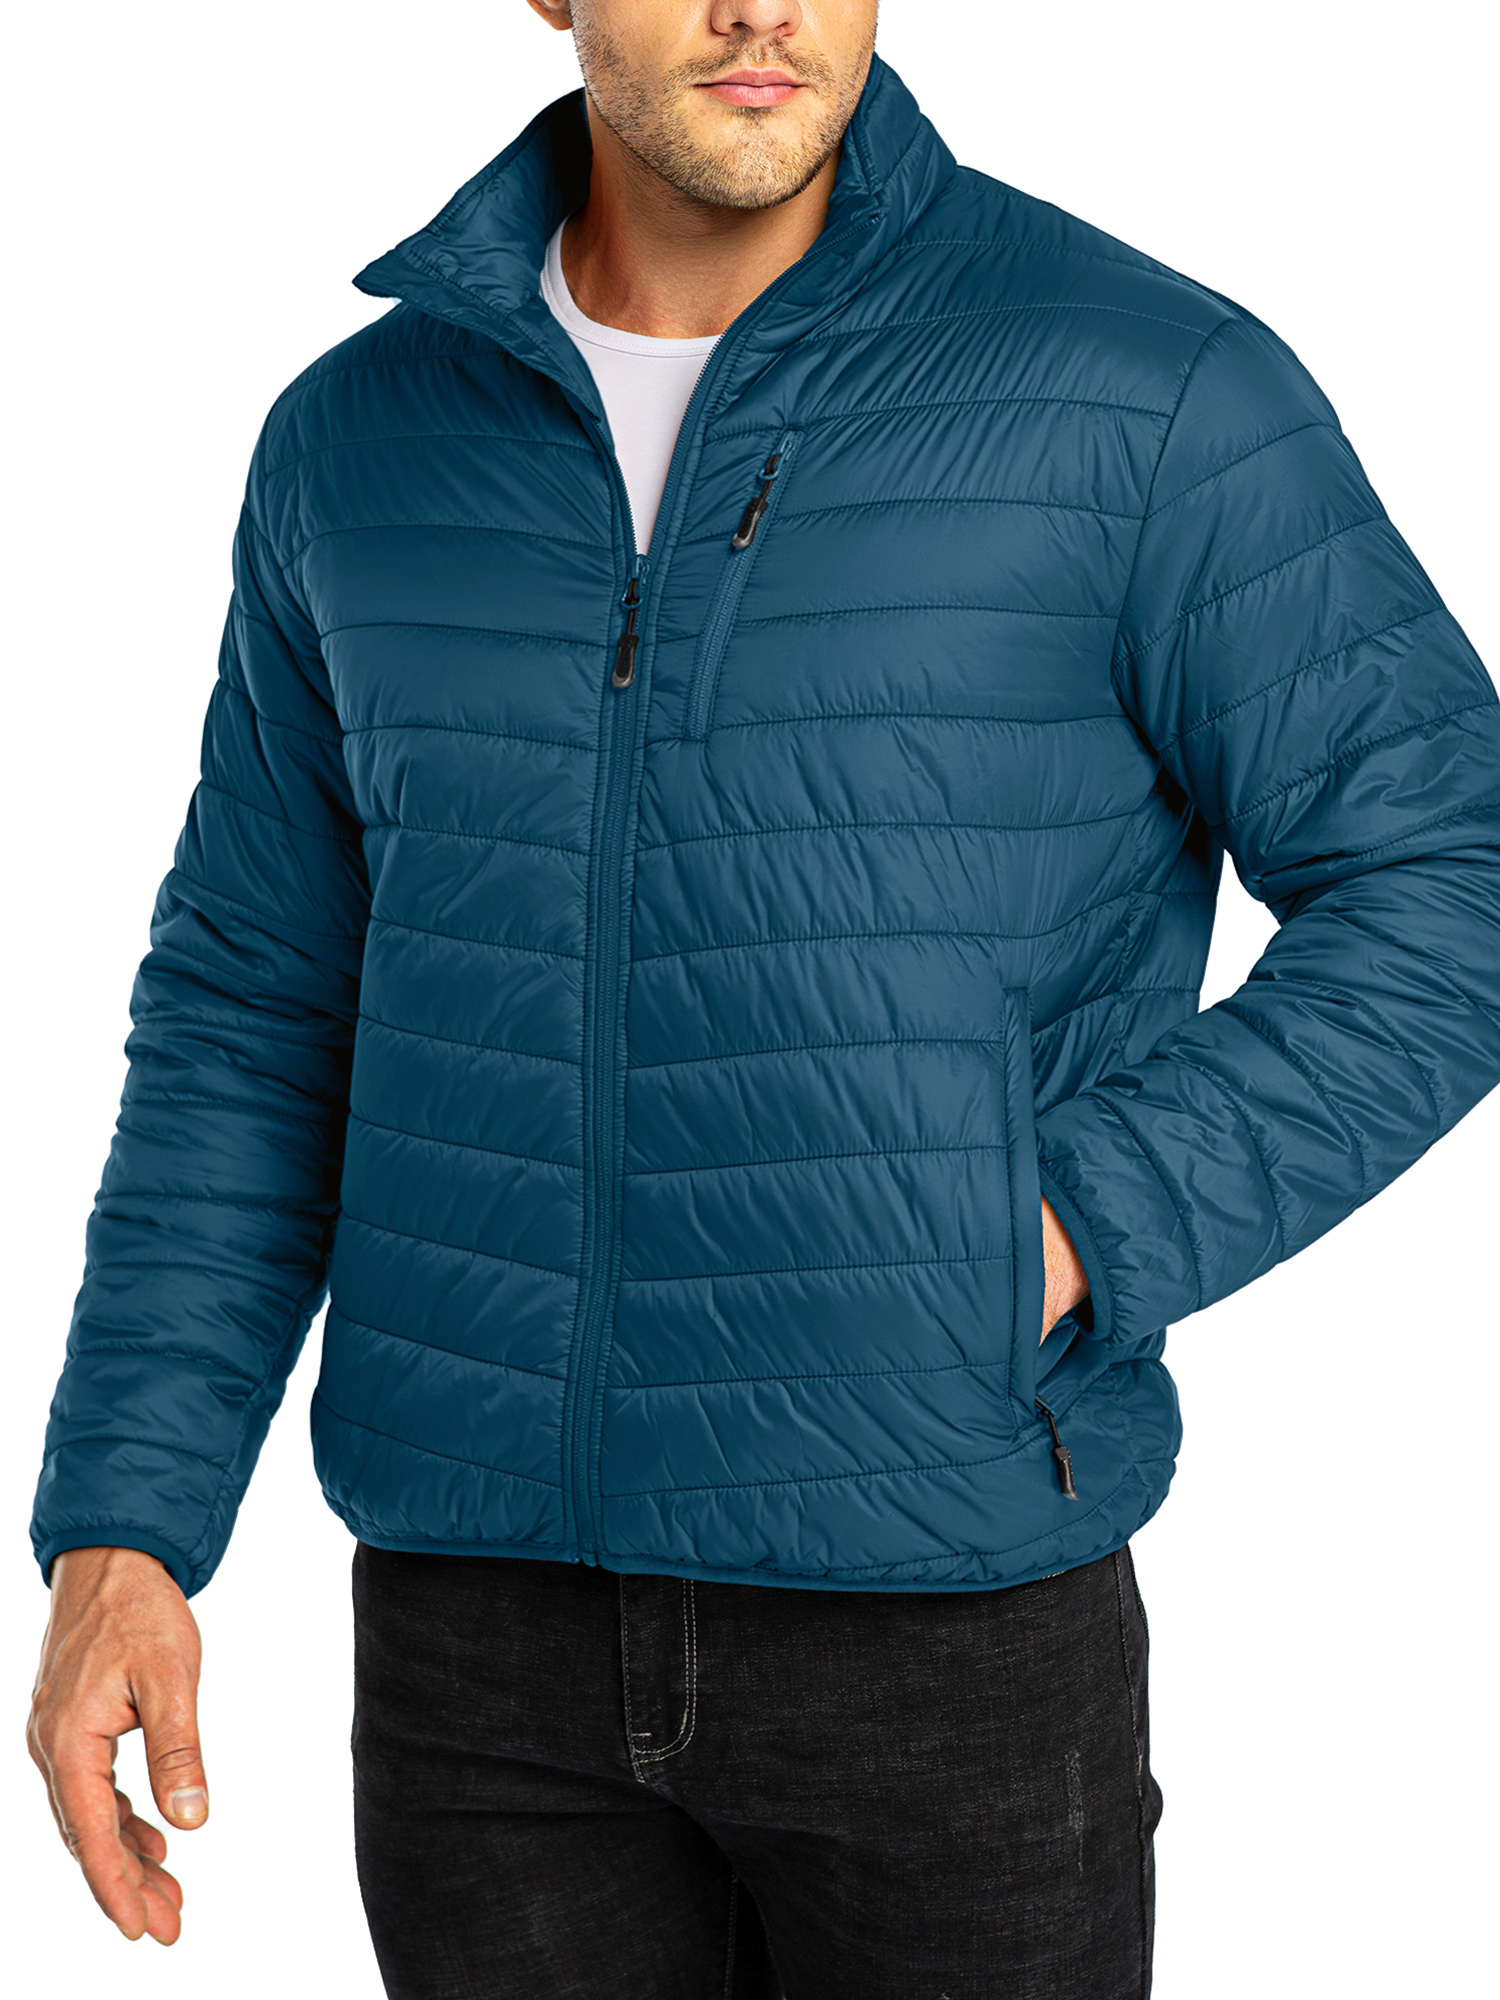 Port Authority Mens Classic Lightweight Essential Jacket